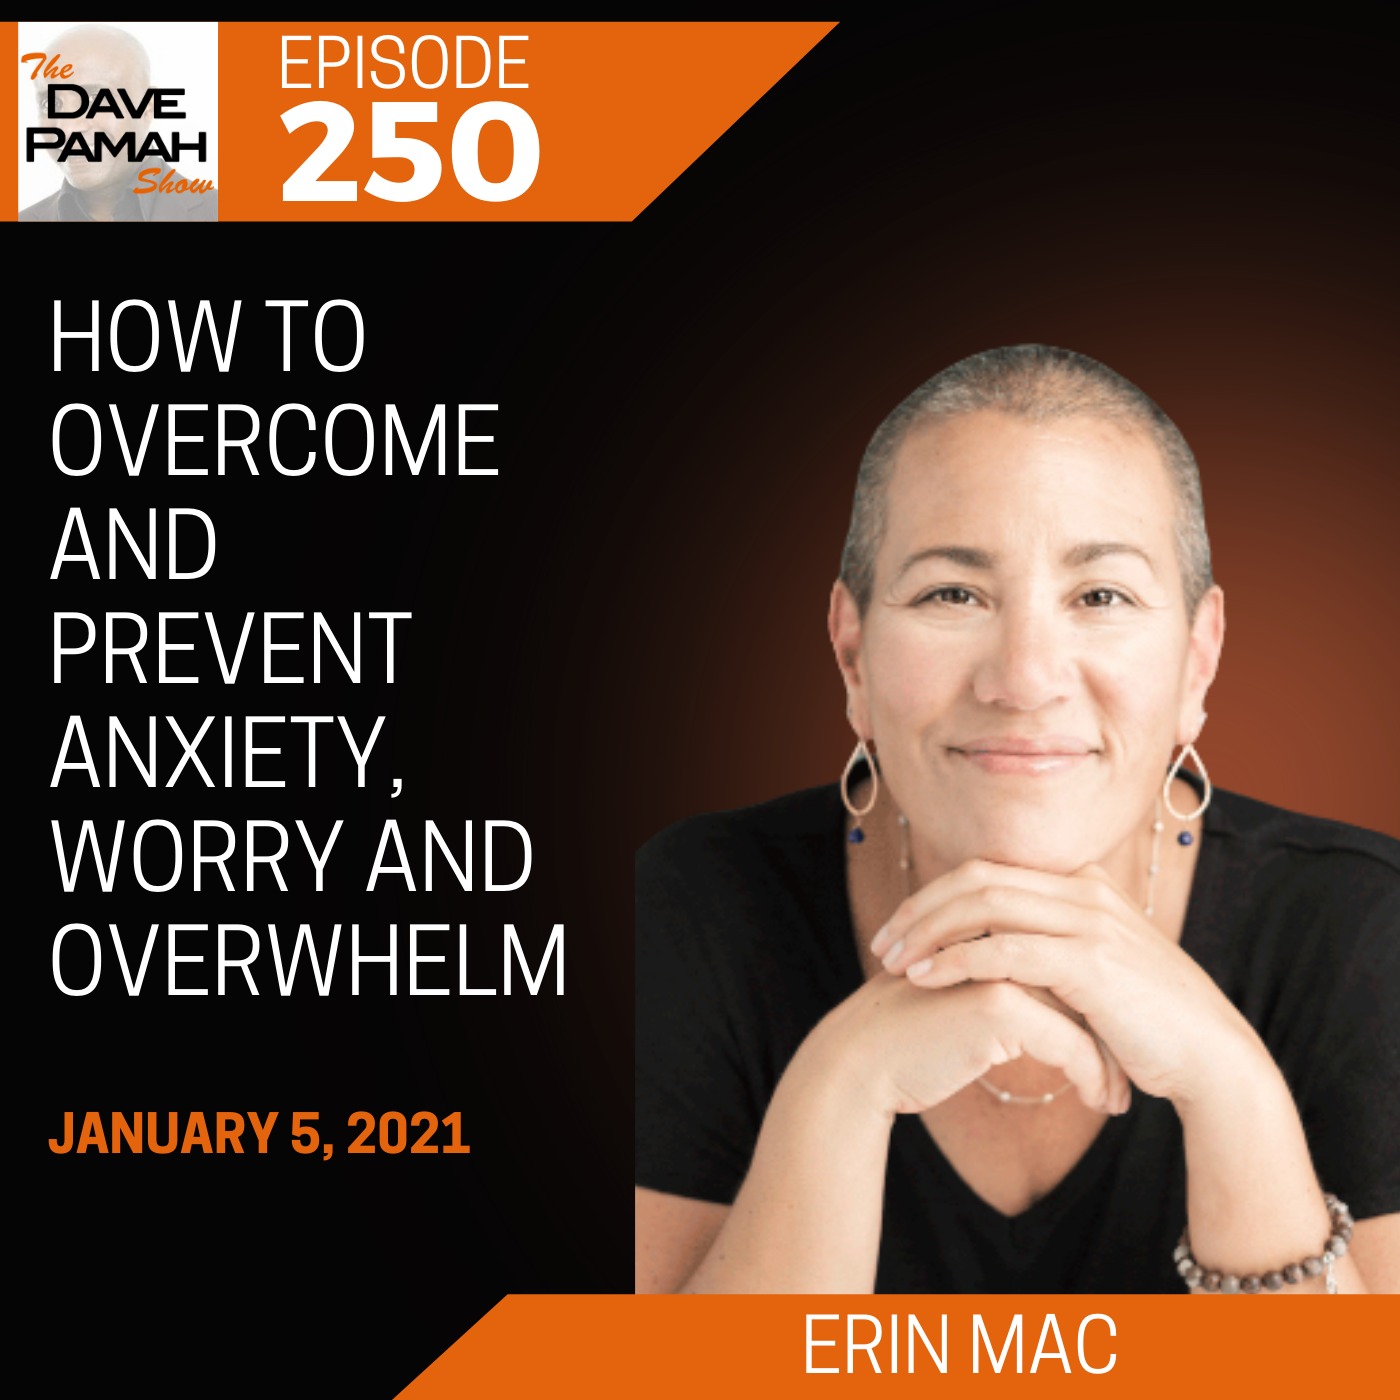 How to overcome and prevent anxiety, worry and overwhelm with Erin Mac